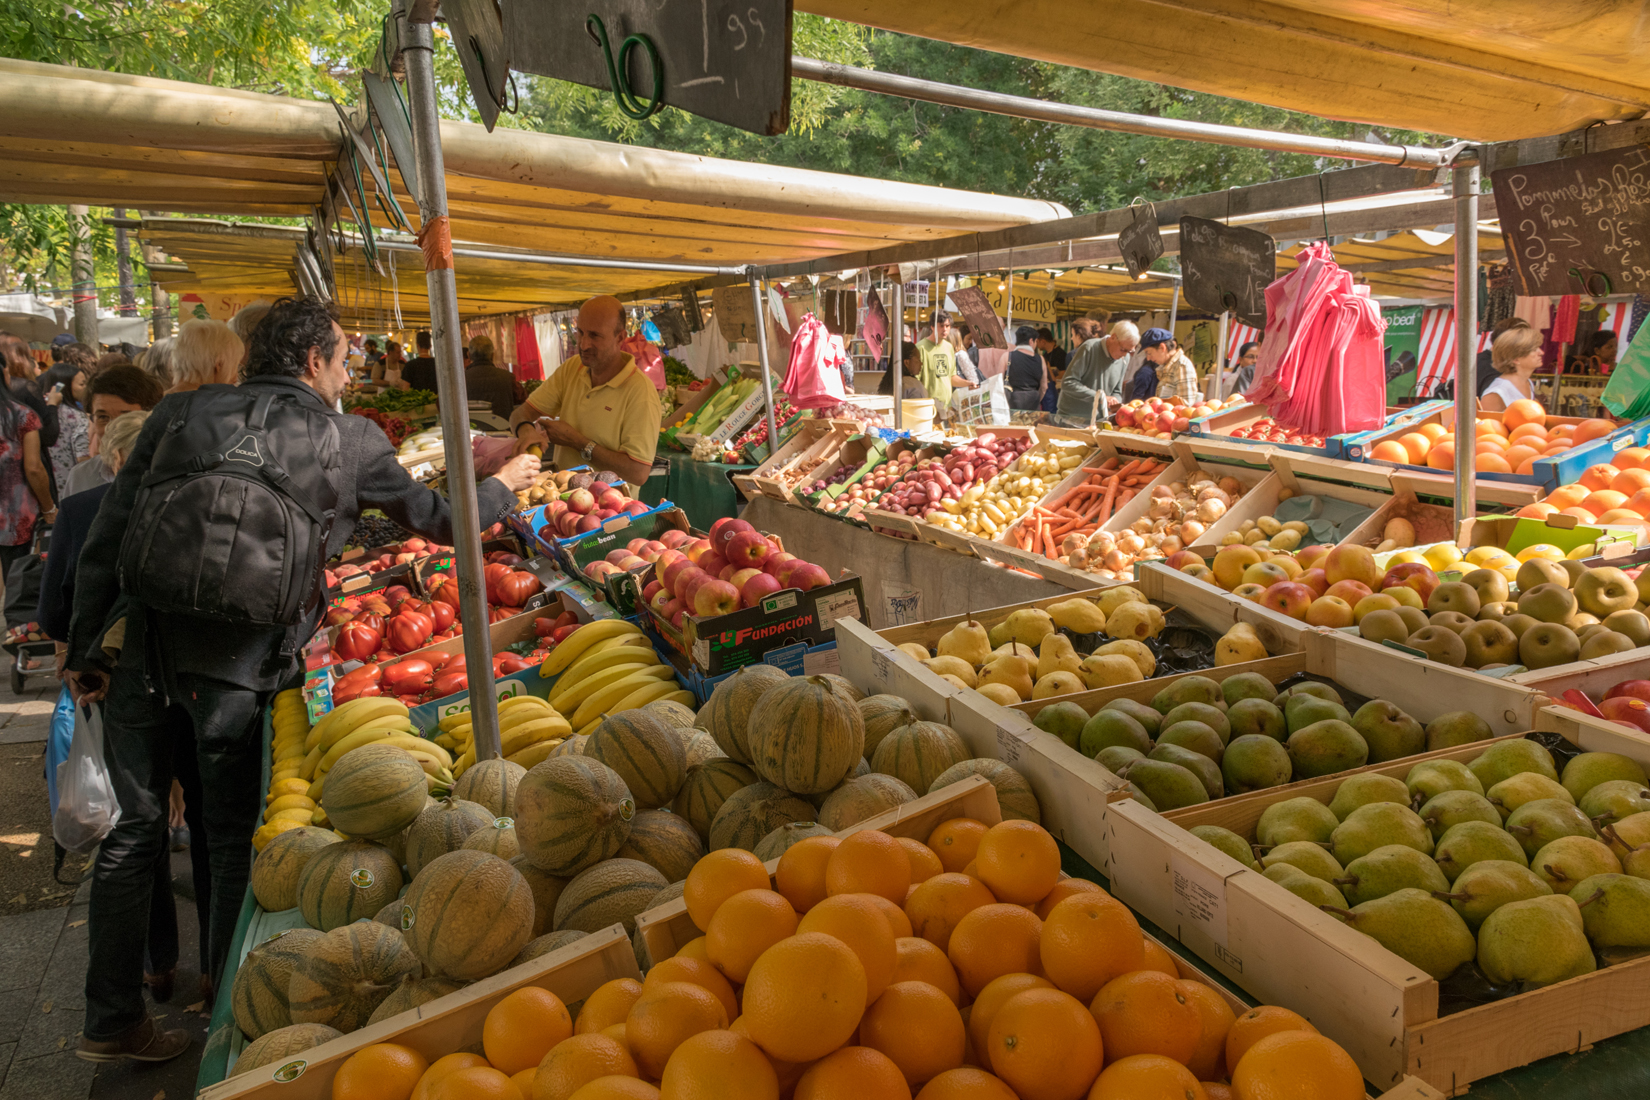 Yet another stall of fruit and vegetables